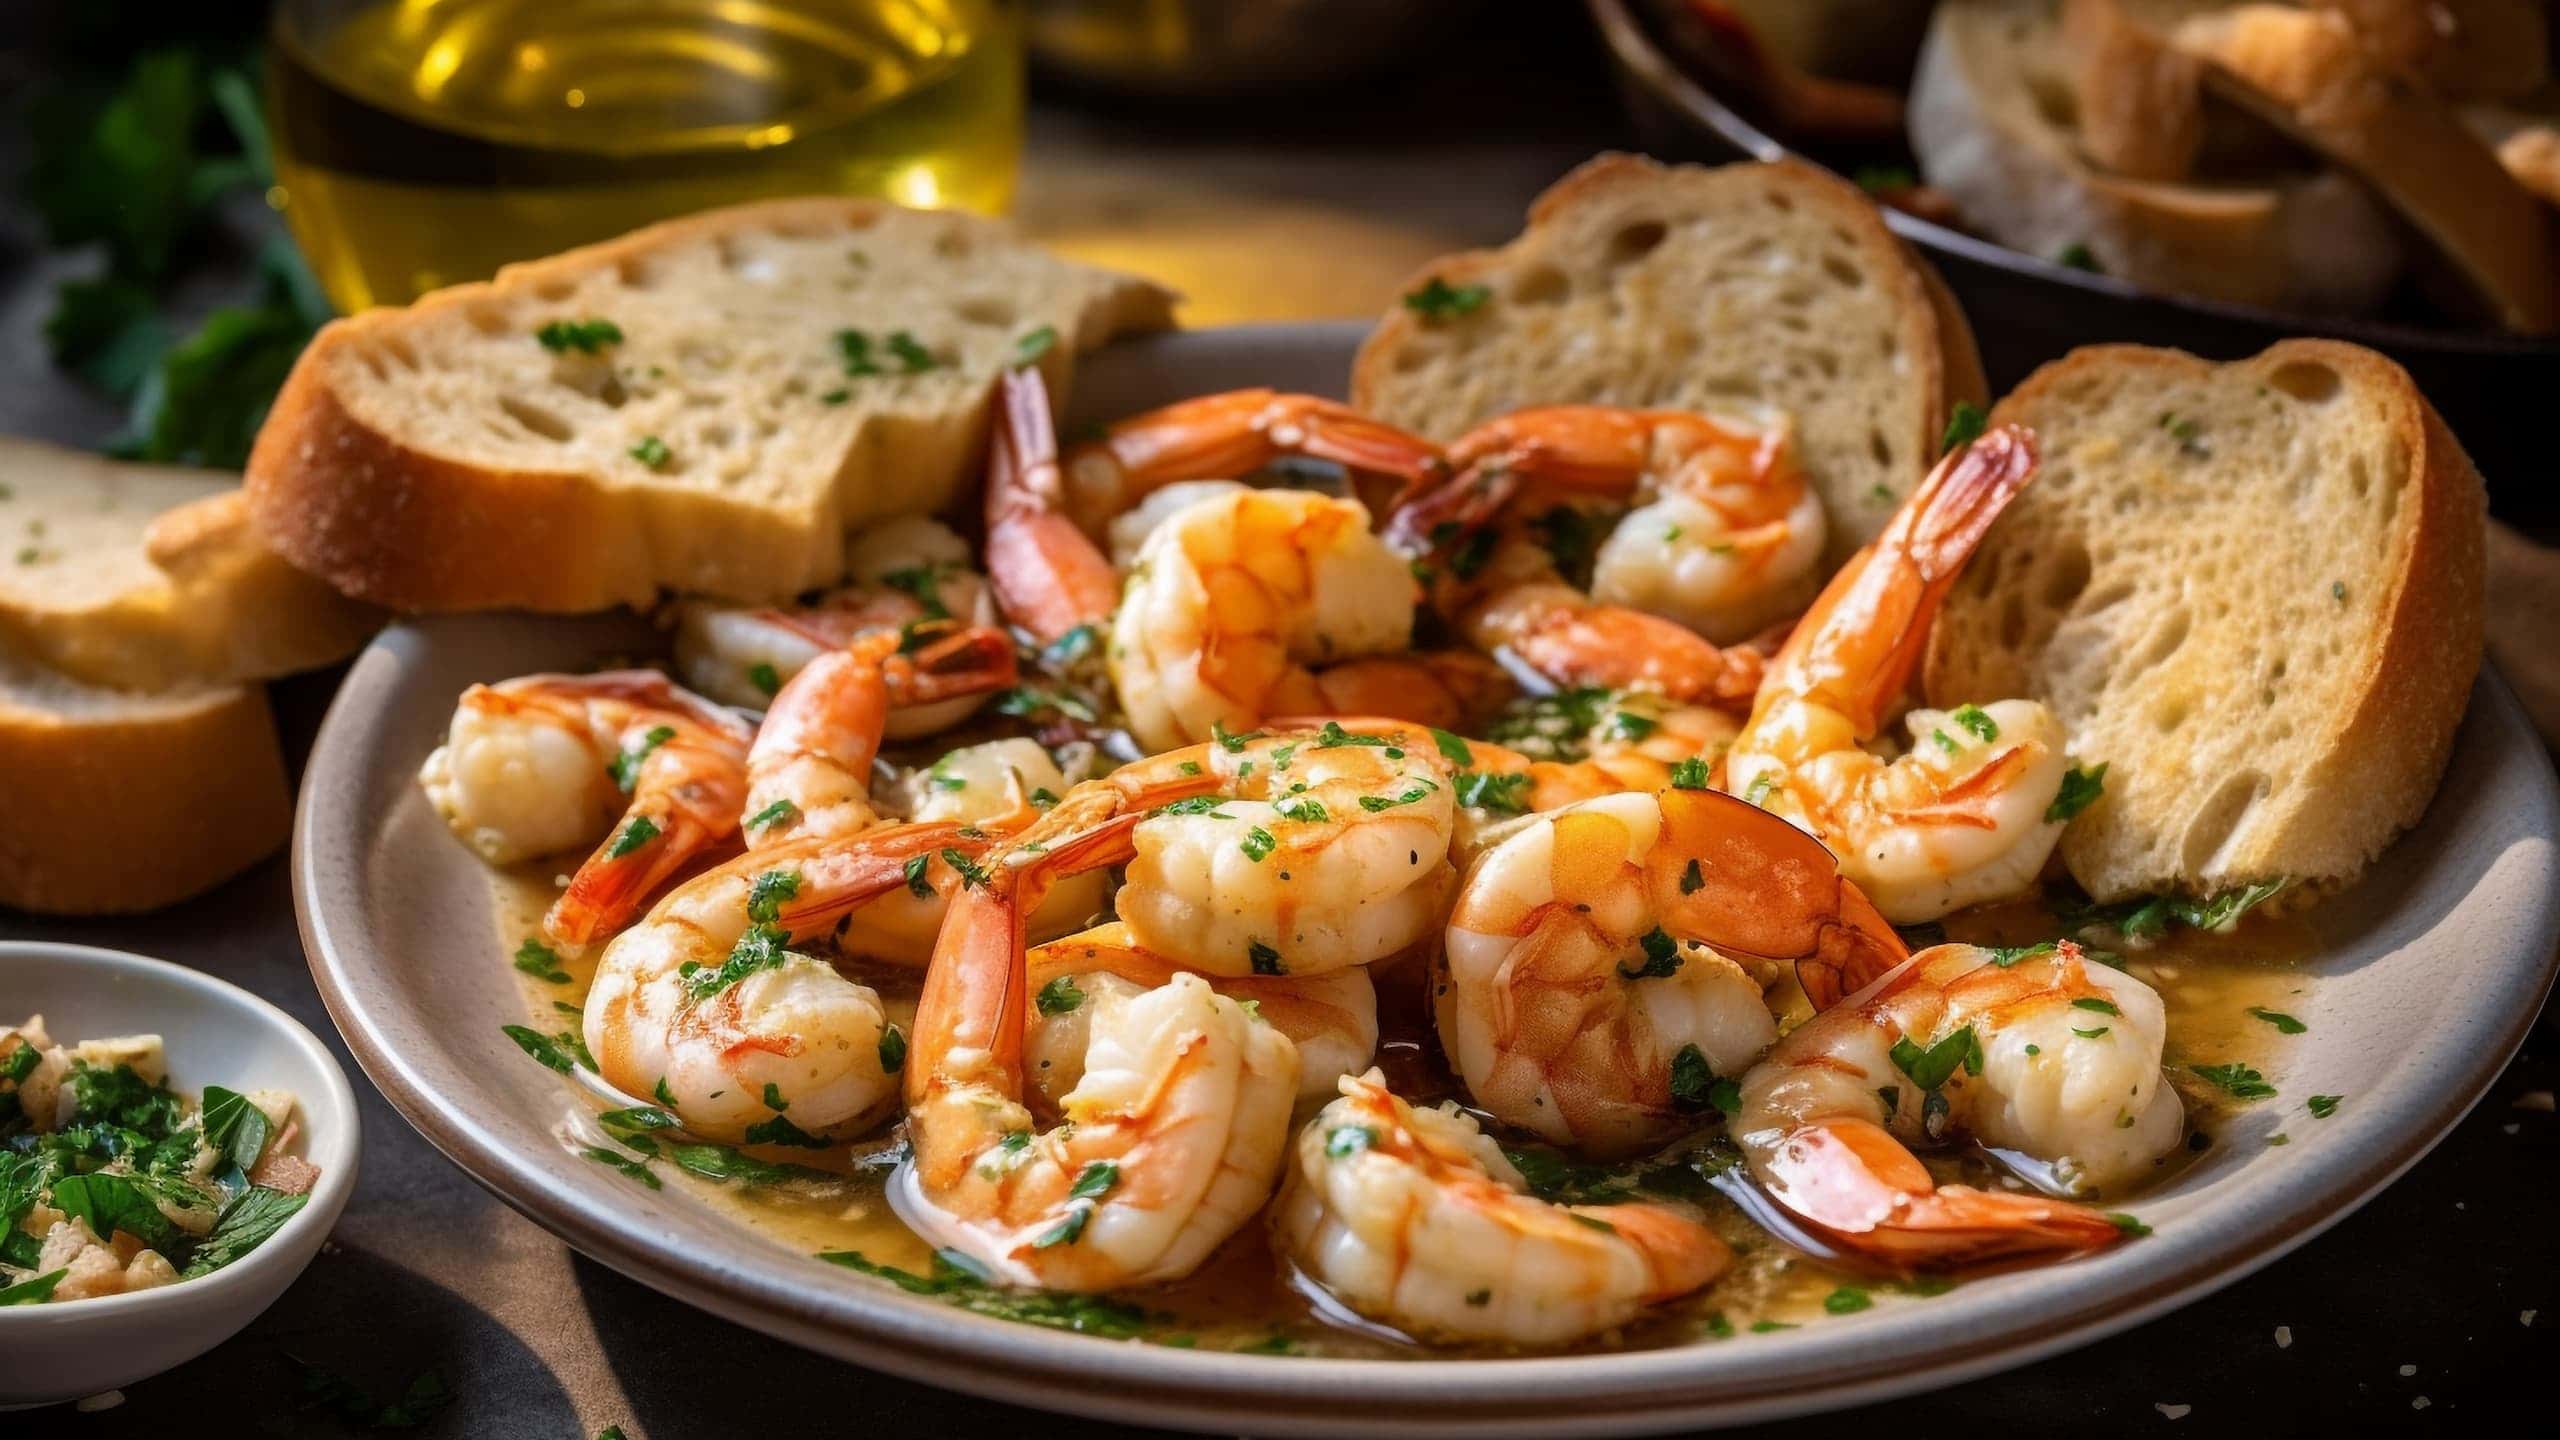 Irresistible Colossal Shrimp Recipe: a Taste of Epic Proportions ...